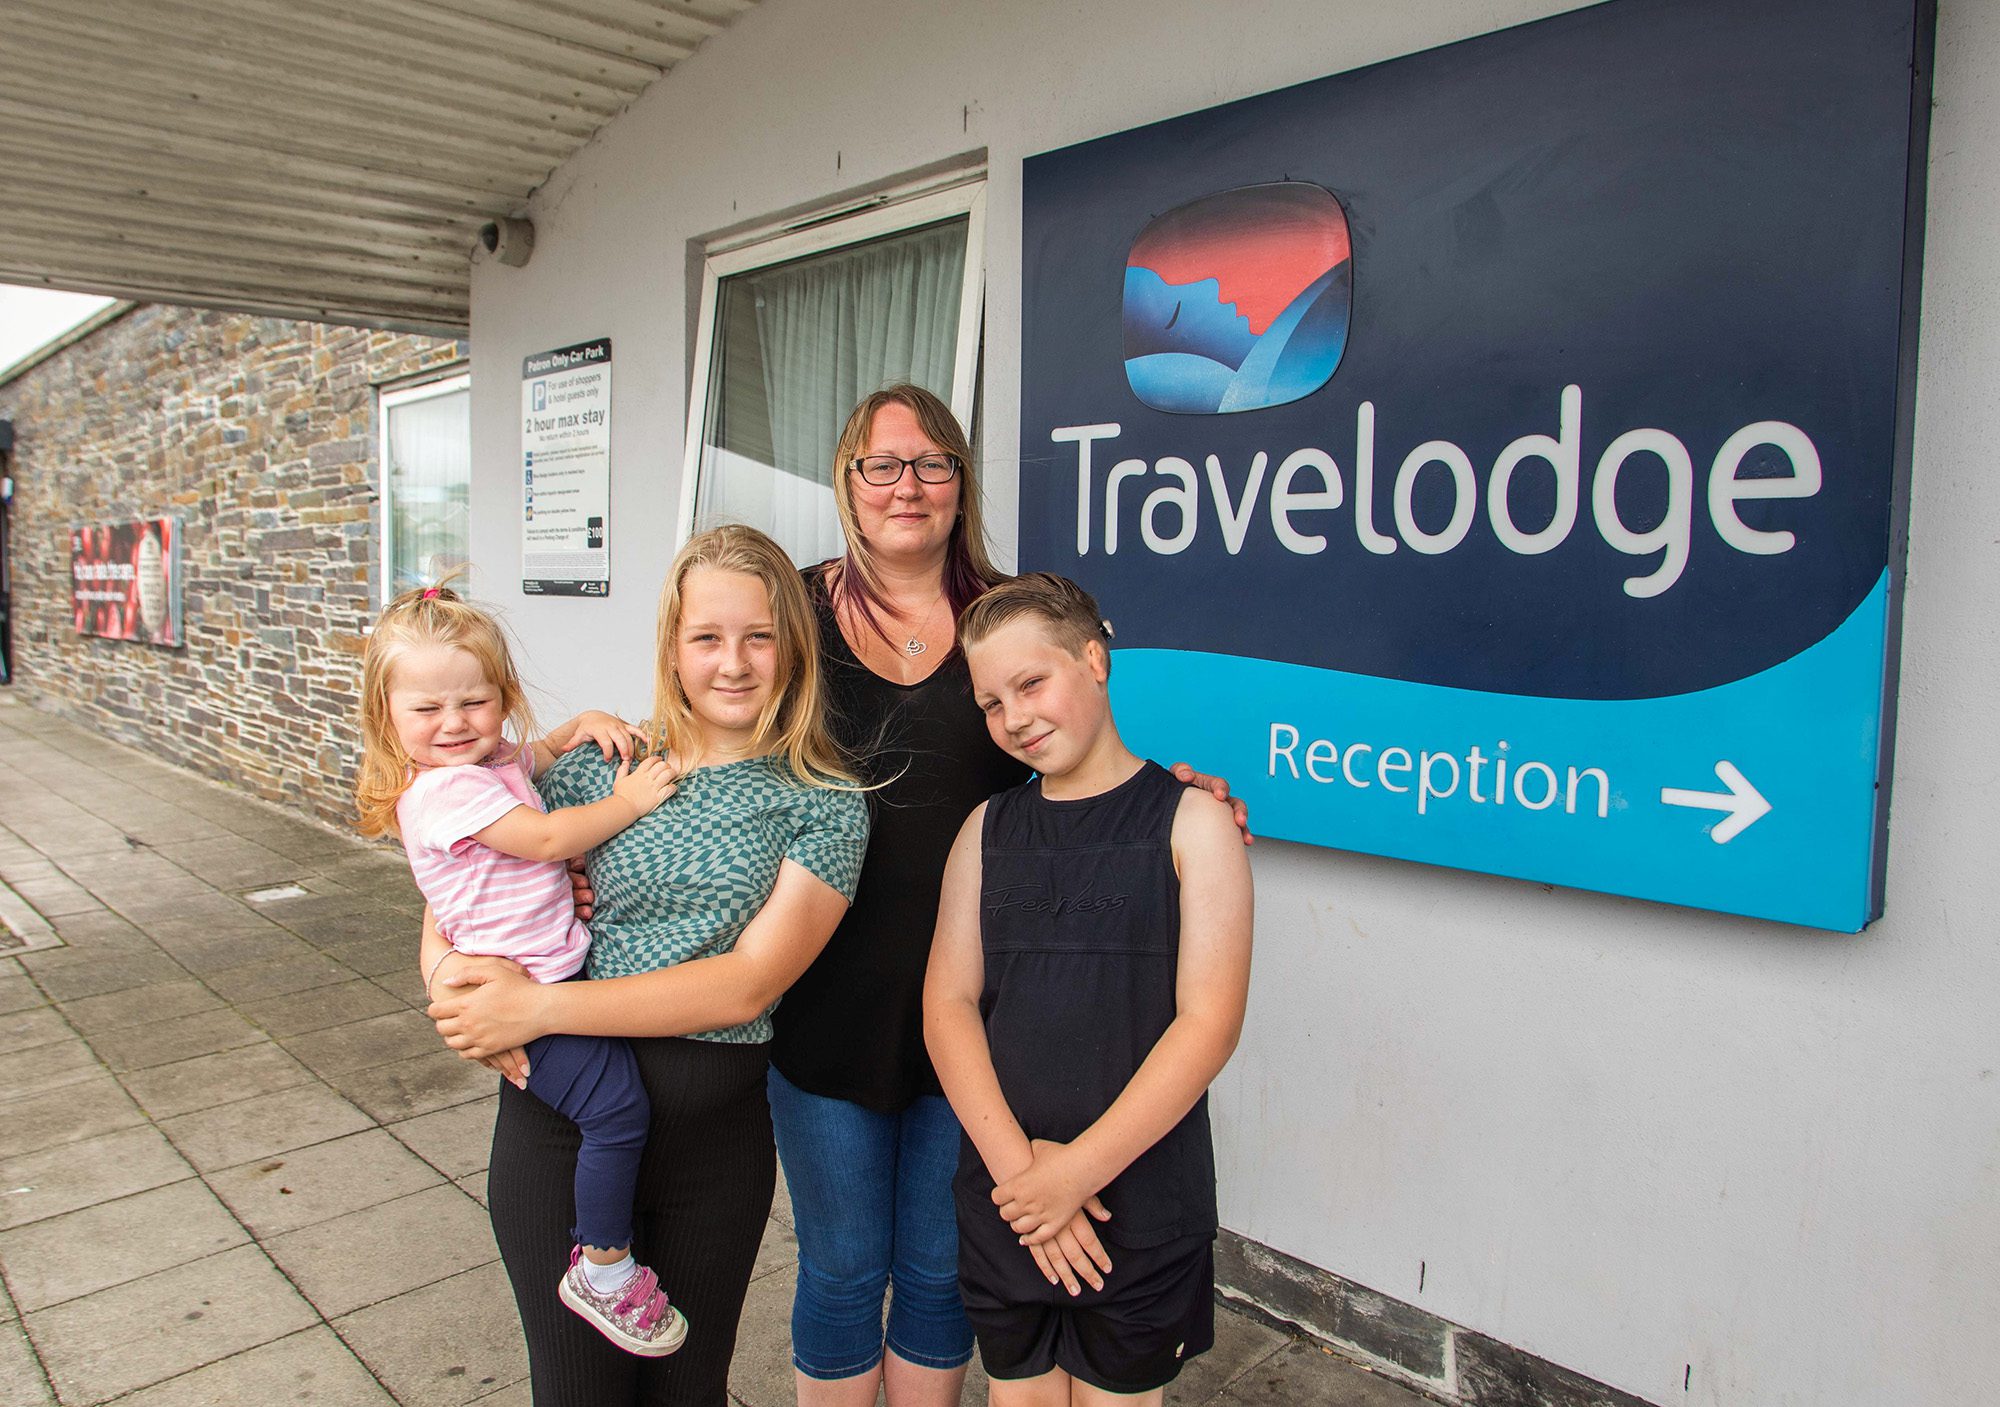 Charlene Pascoe with her children 12-year-old Freya, 10-year-old Kieran and one-year-old Darcy, outside the Travelodge in St Austell, Cornwall, in the U.K., on July 31, 2022 . (SWNS/Zenger)